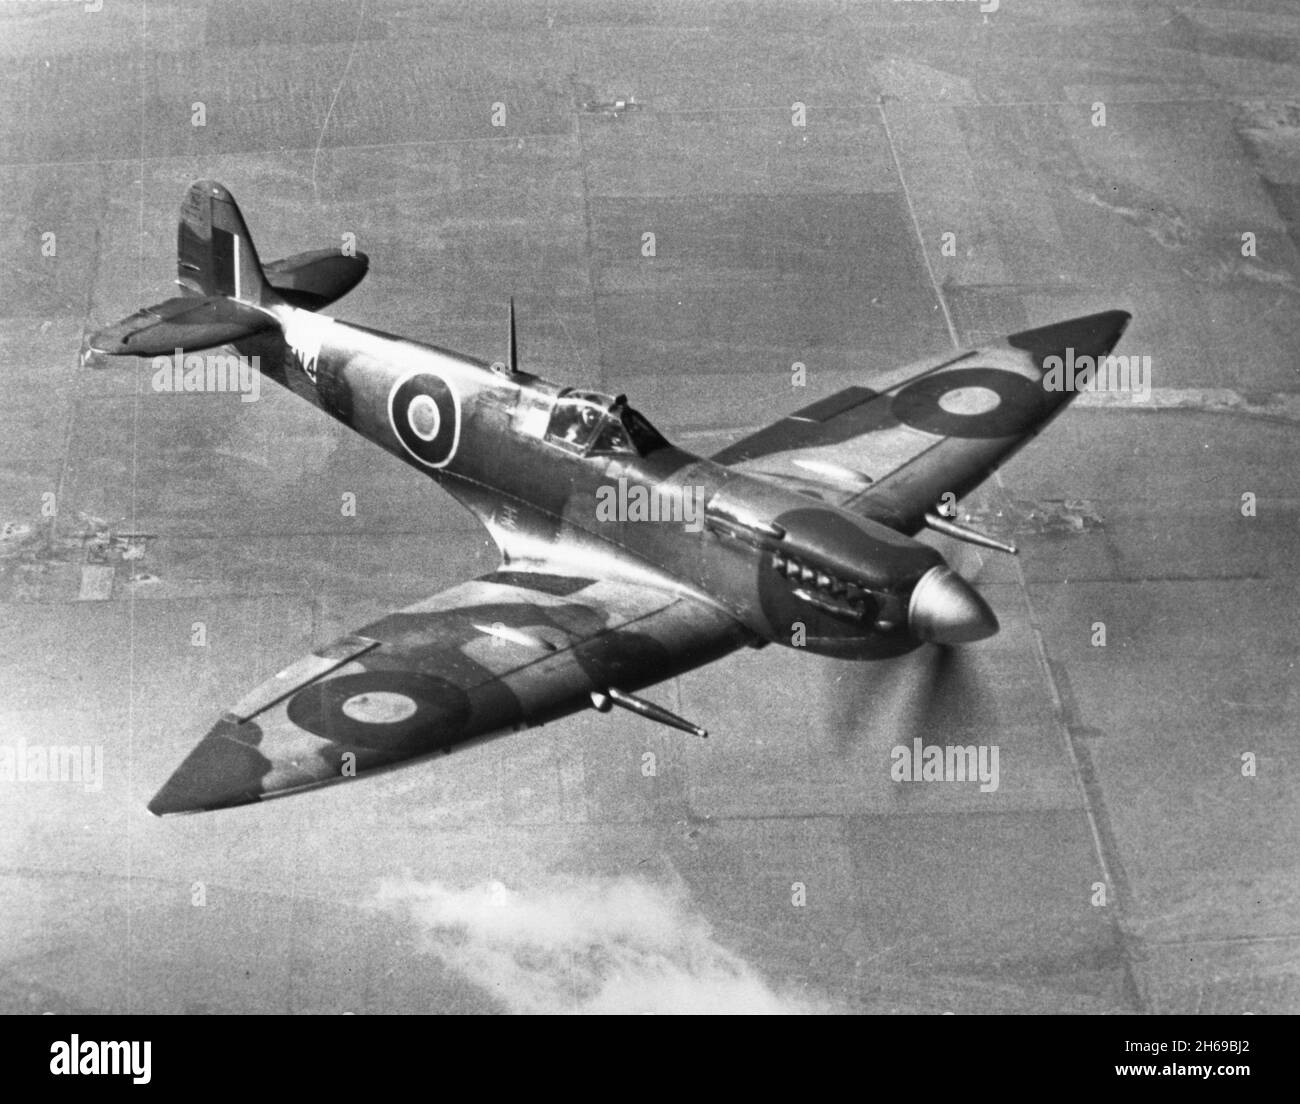 LANGLEY, USA - 1943 - RAF Supermarine Spitfire H F Mk. VII being tested at Langley, USA in 1943. The US Army Air Force used many Spitfires in World Wa Stock Photo